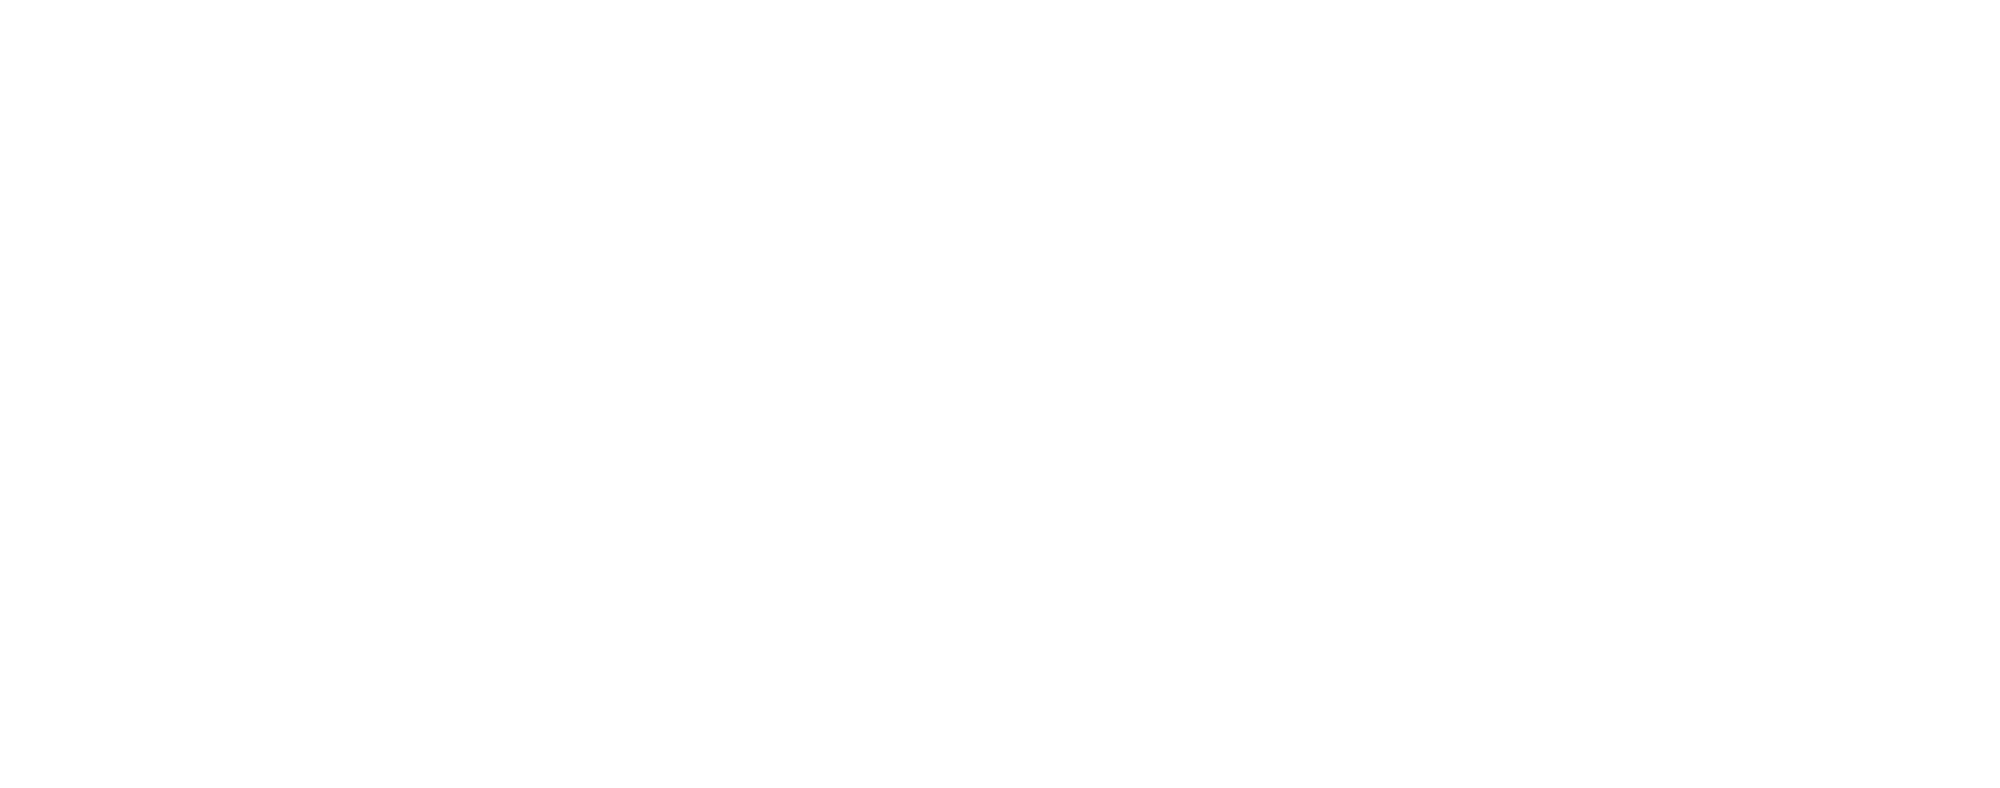 Logo stacked in White | Salt Creek Partners | M&A Advisory Firm | Mergers and Acquisitions for Growing, Emerging, and Middle Markets